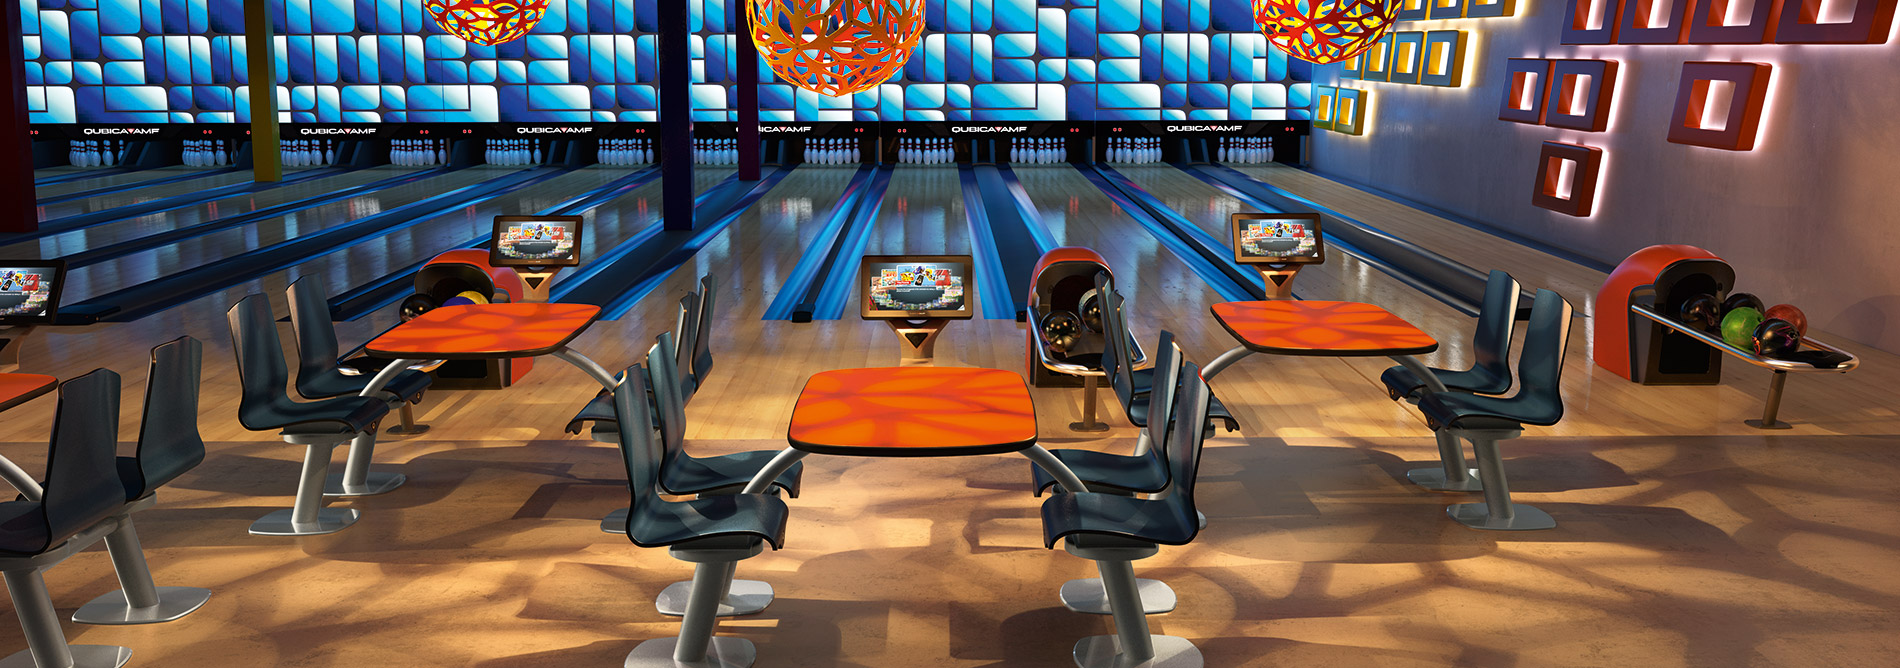 Bowling-QubicaAMF-furniture-harmony-energy-banner.jpg